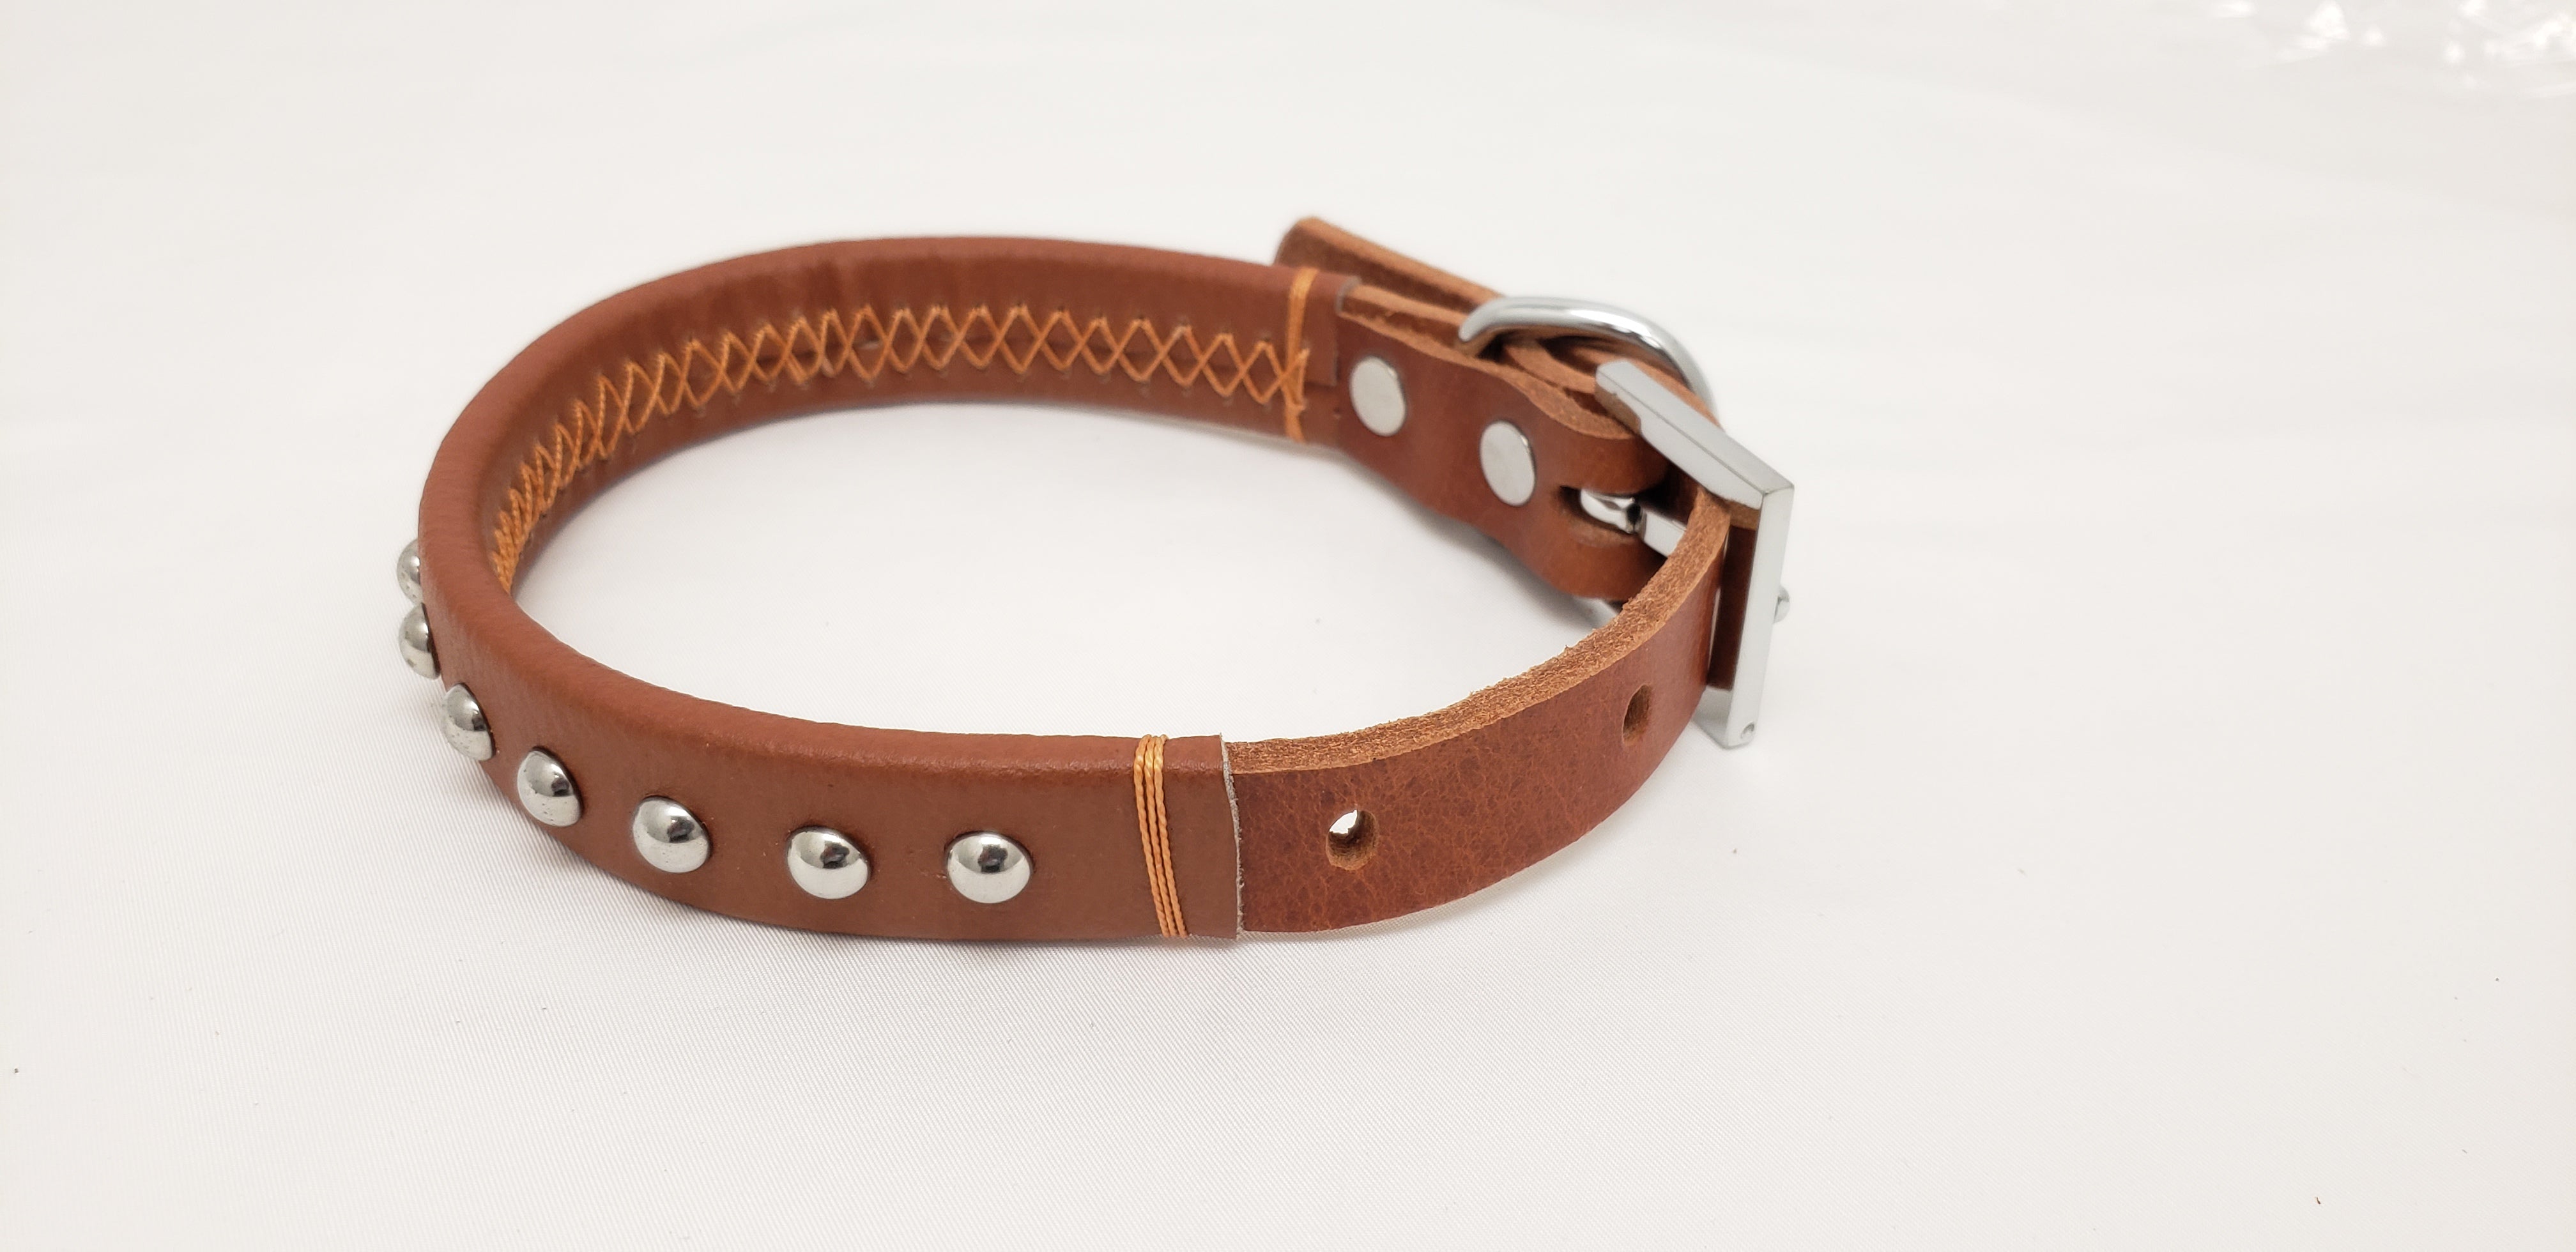 Leather Dog Collar with Single Line of Silver Chrome Buttons - Dark Brown - Small